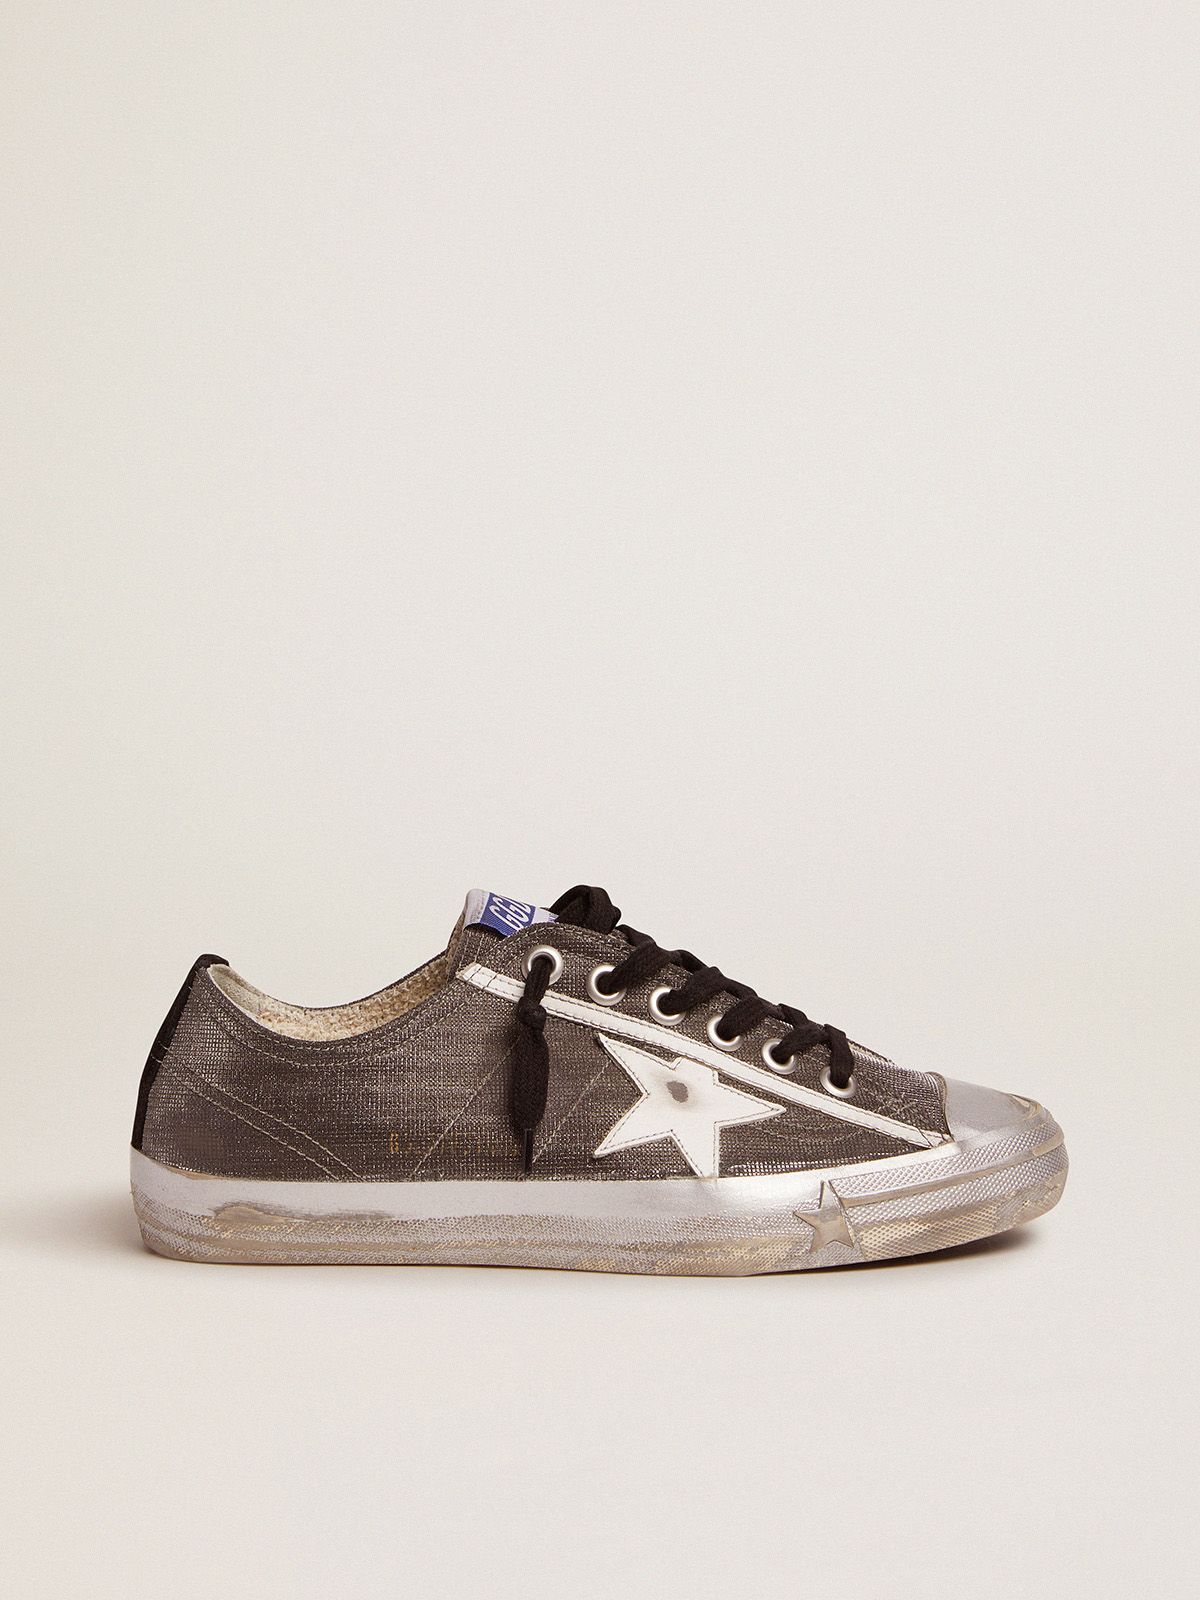 golden goose and sneakers white gray pattern with V-Star LTD star Dark checkered